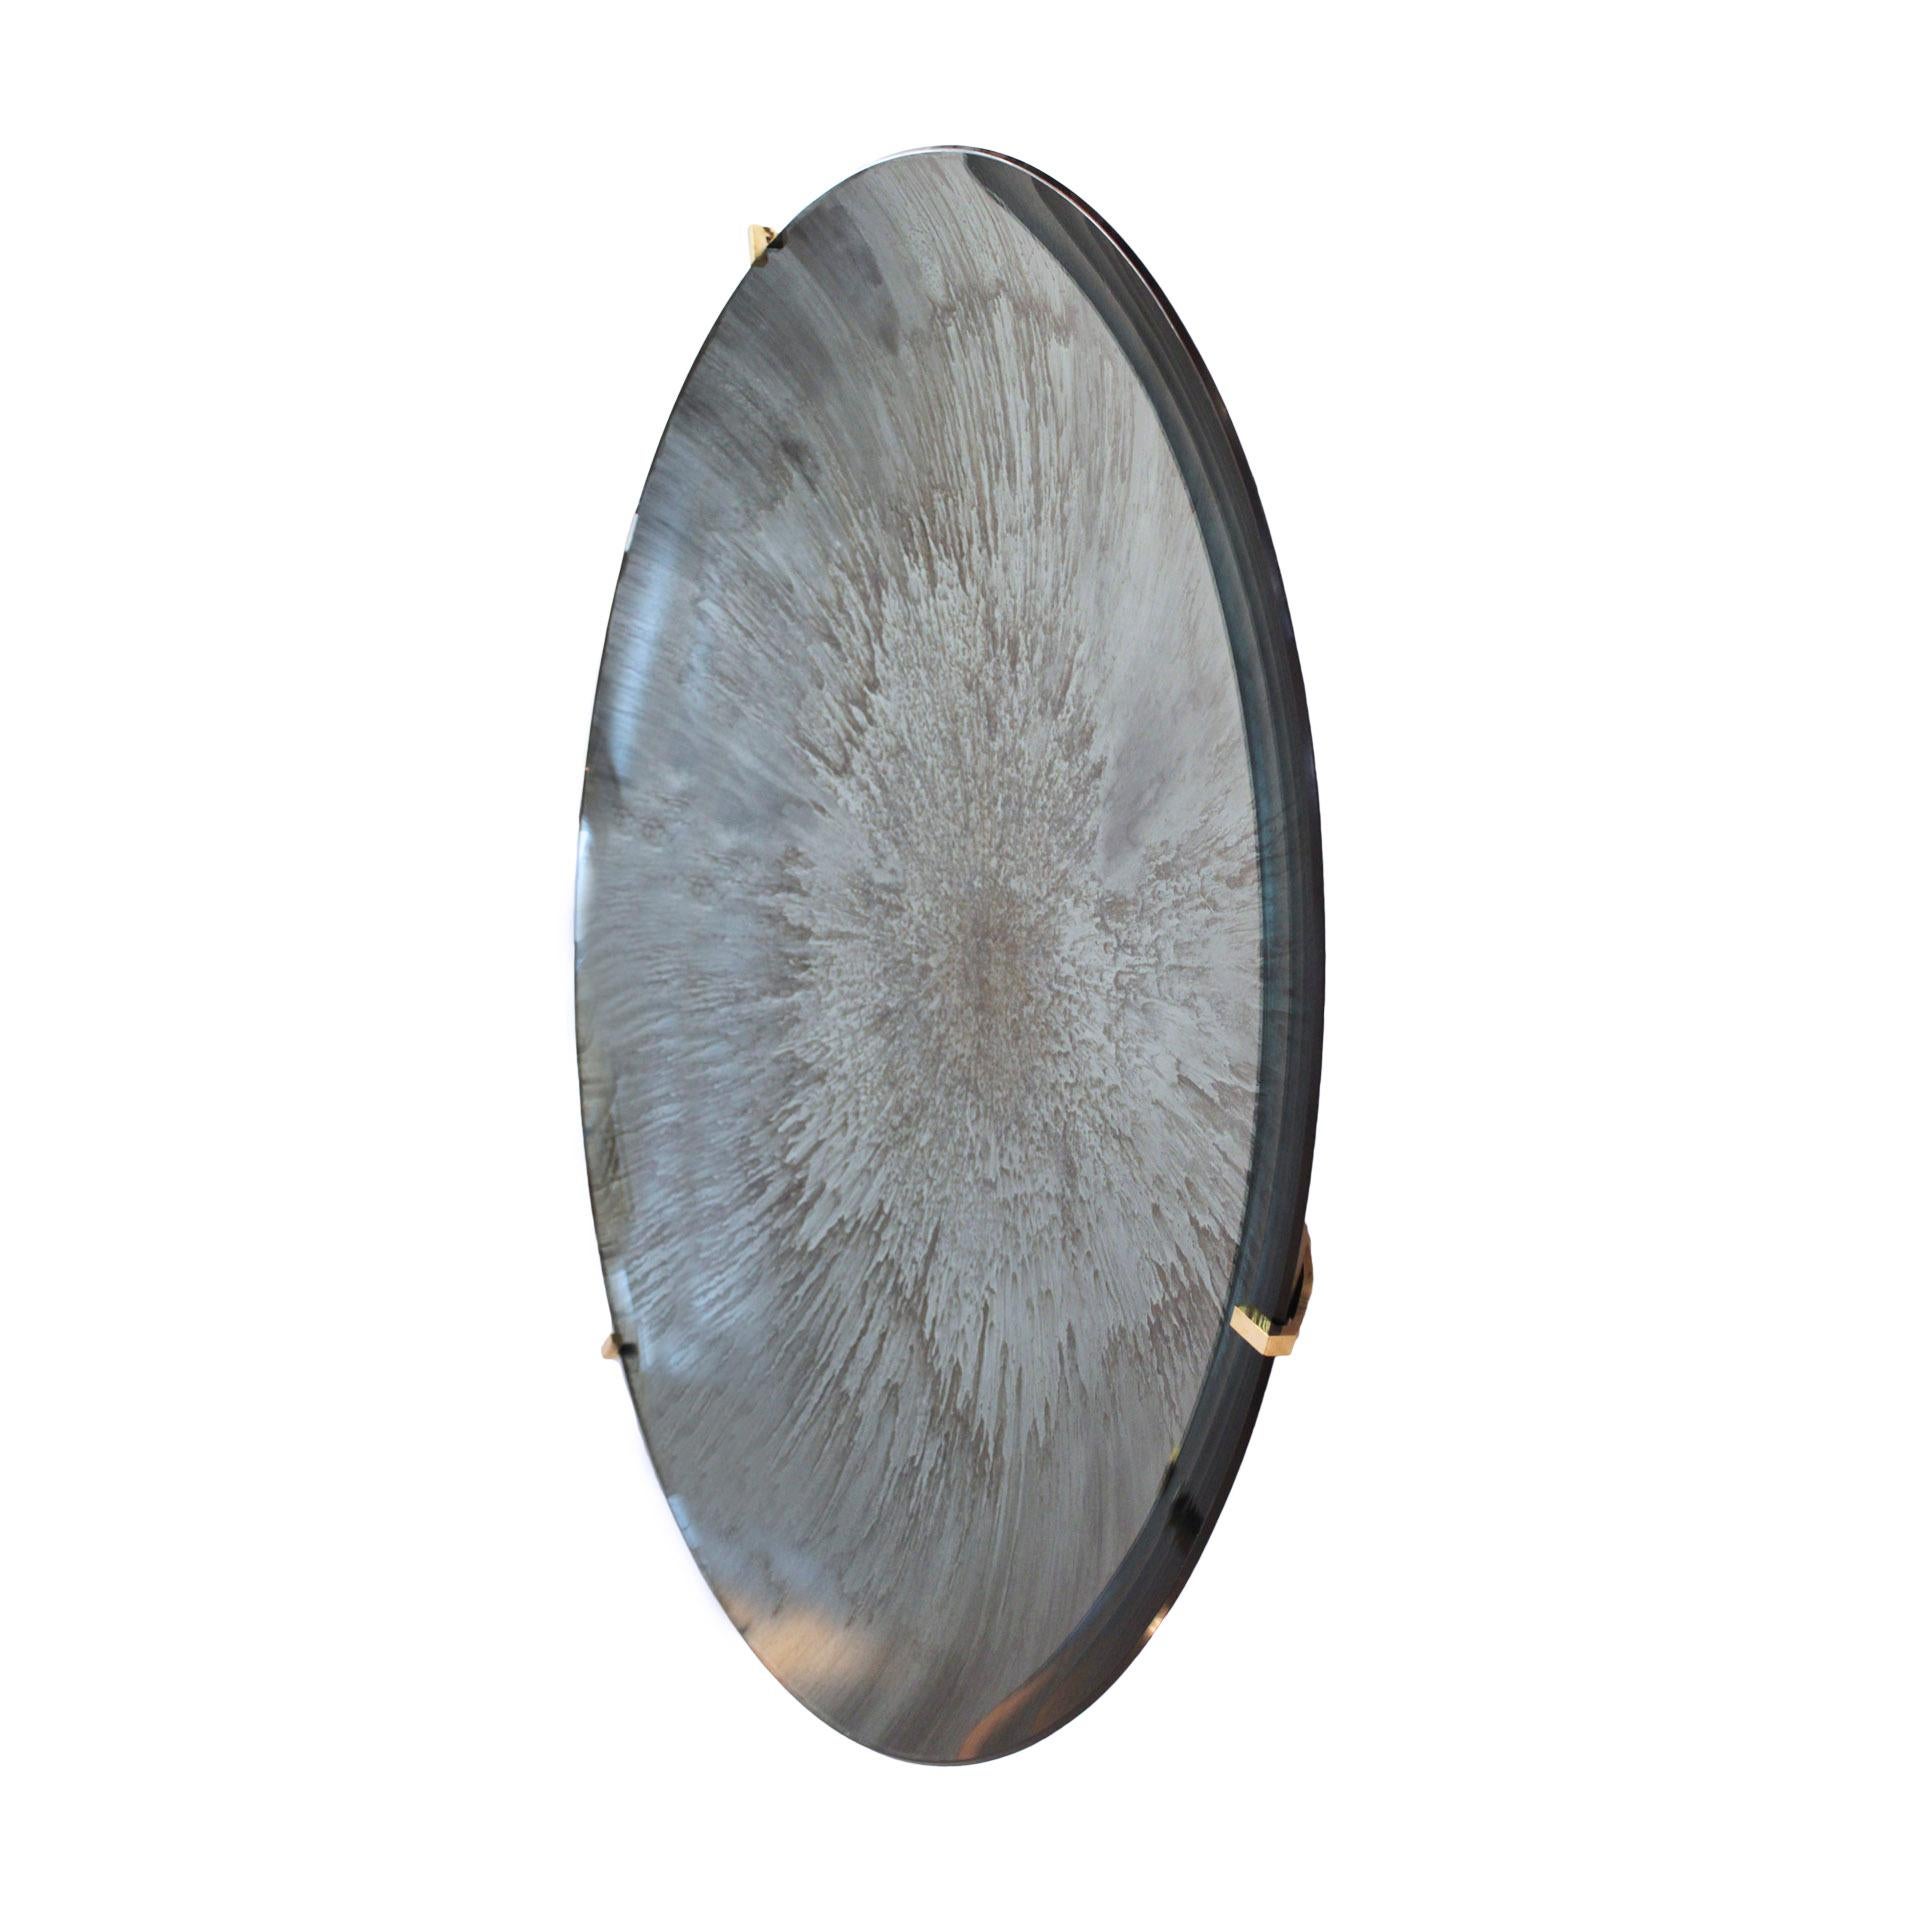 Modern sculptural beautiful concave French mirror. Wall hanging artwork handmade in bluemolded glass. Finished with bronze finial details on the back to hang on the wall. Unique piece. Made in France.

Every item LA Studio offers is checked by our